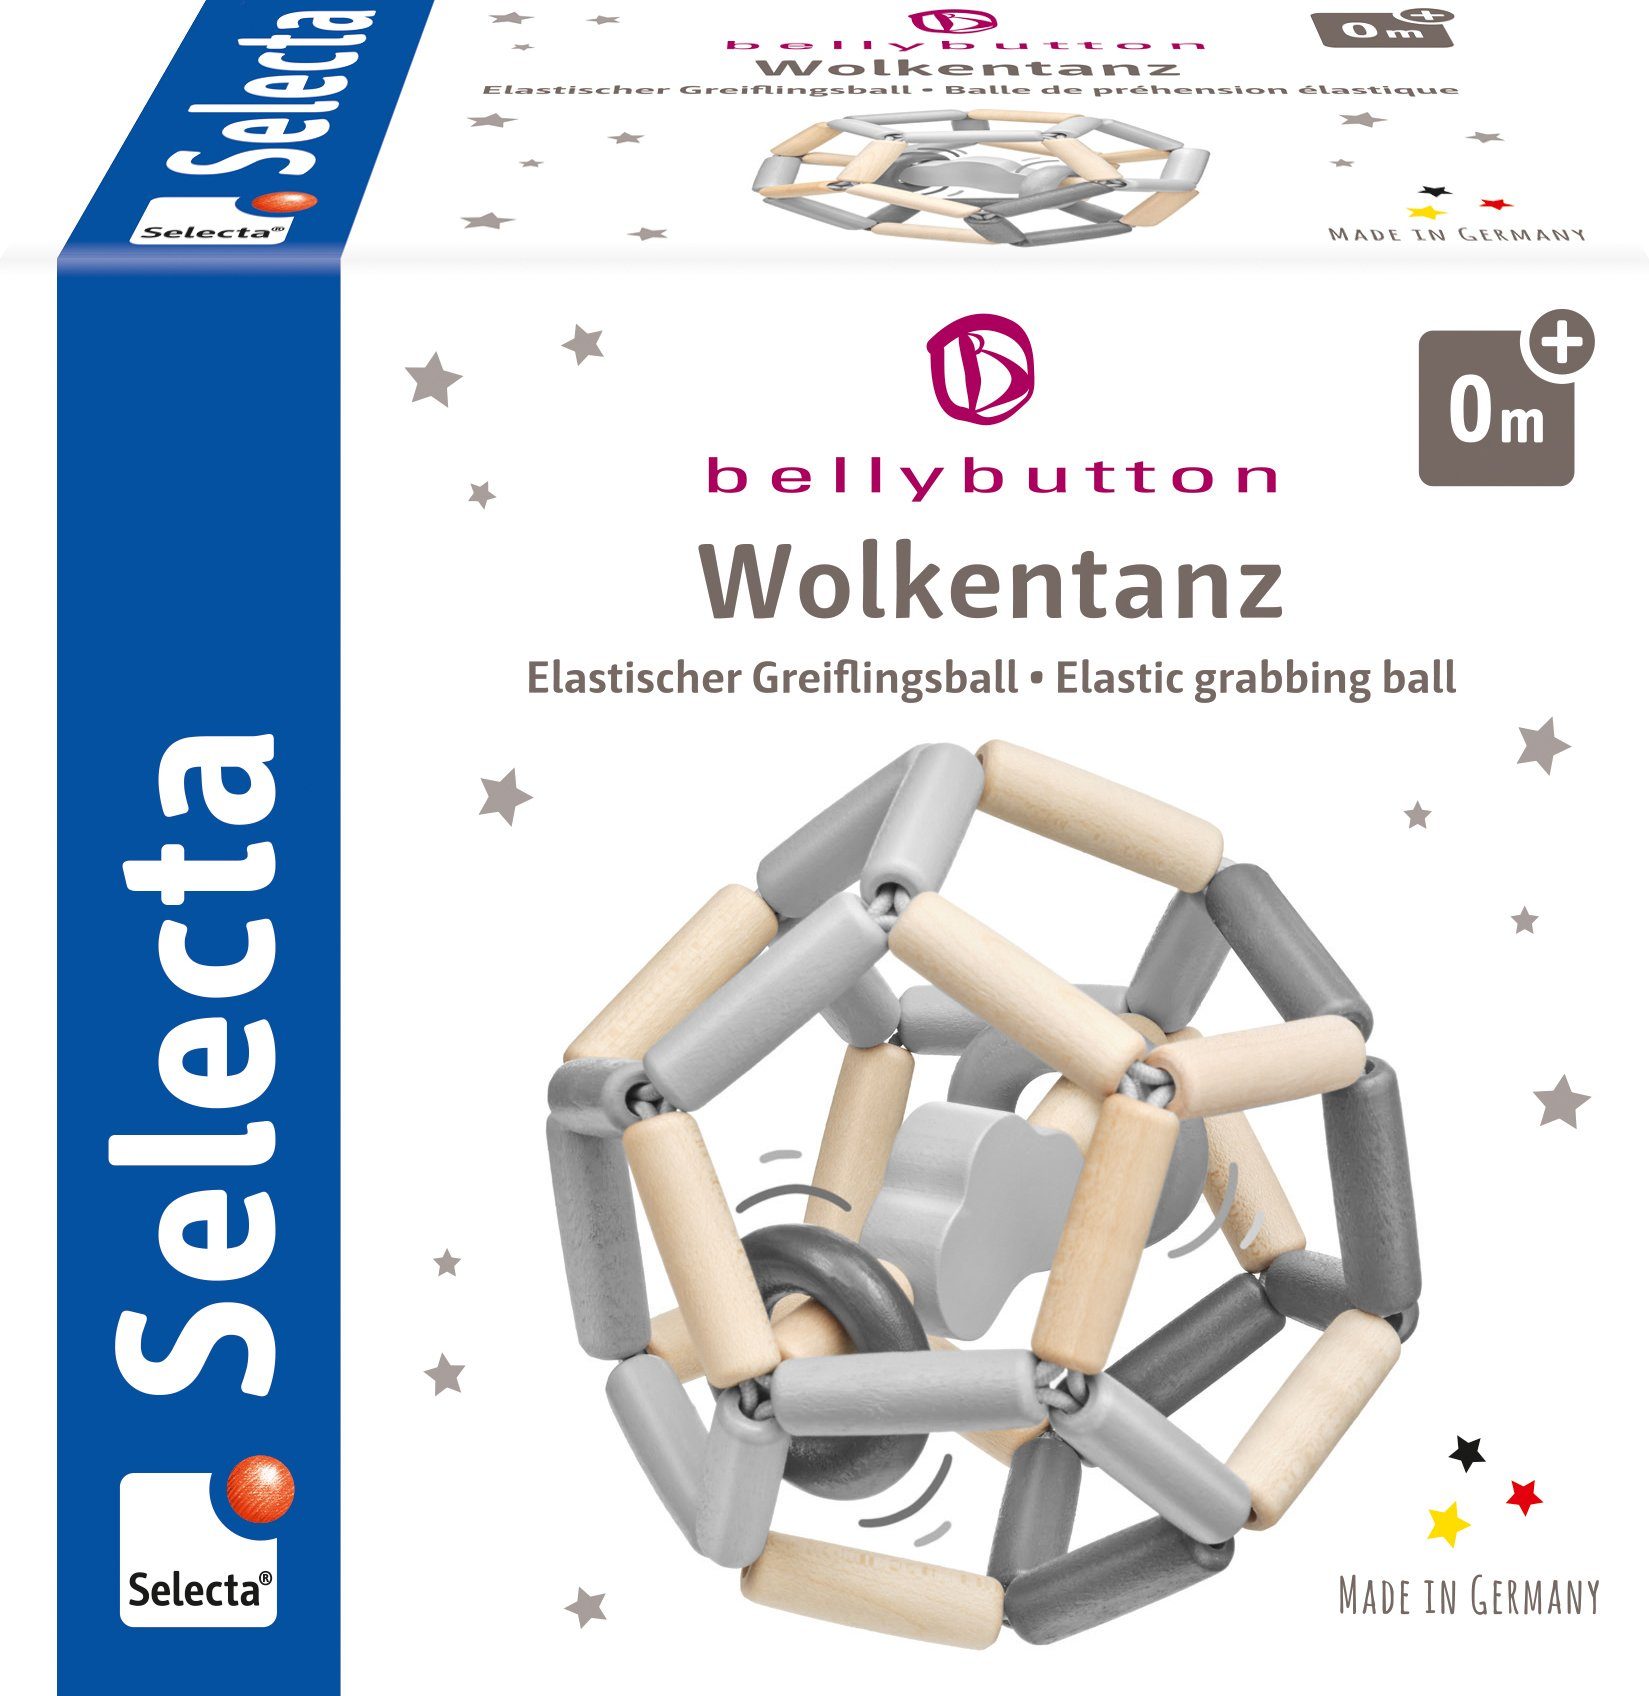 Selecta Made bellybutton Germany Wolkentanz, Selecta, Greiflingball Greifspielzeug in by